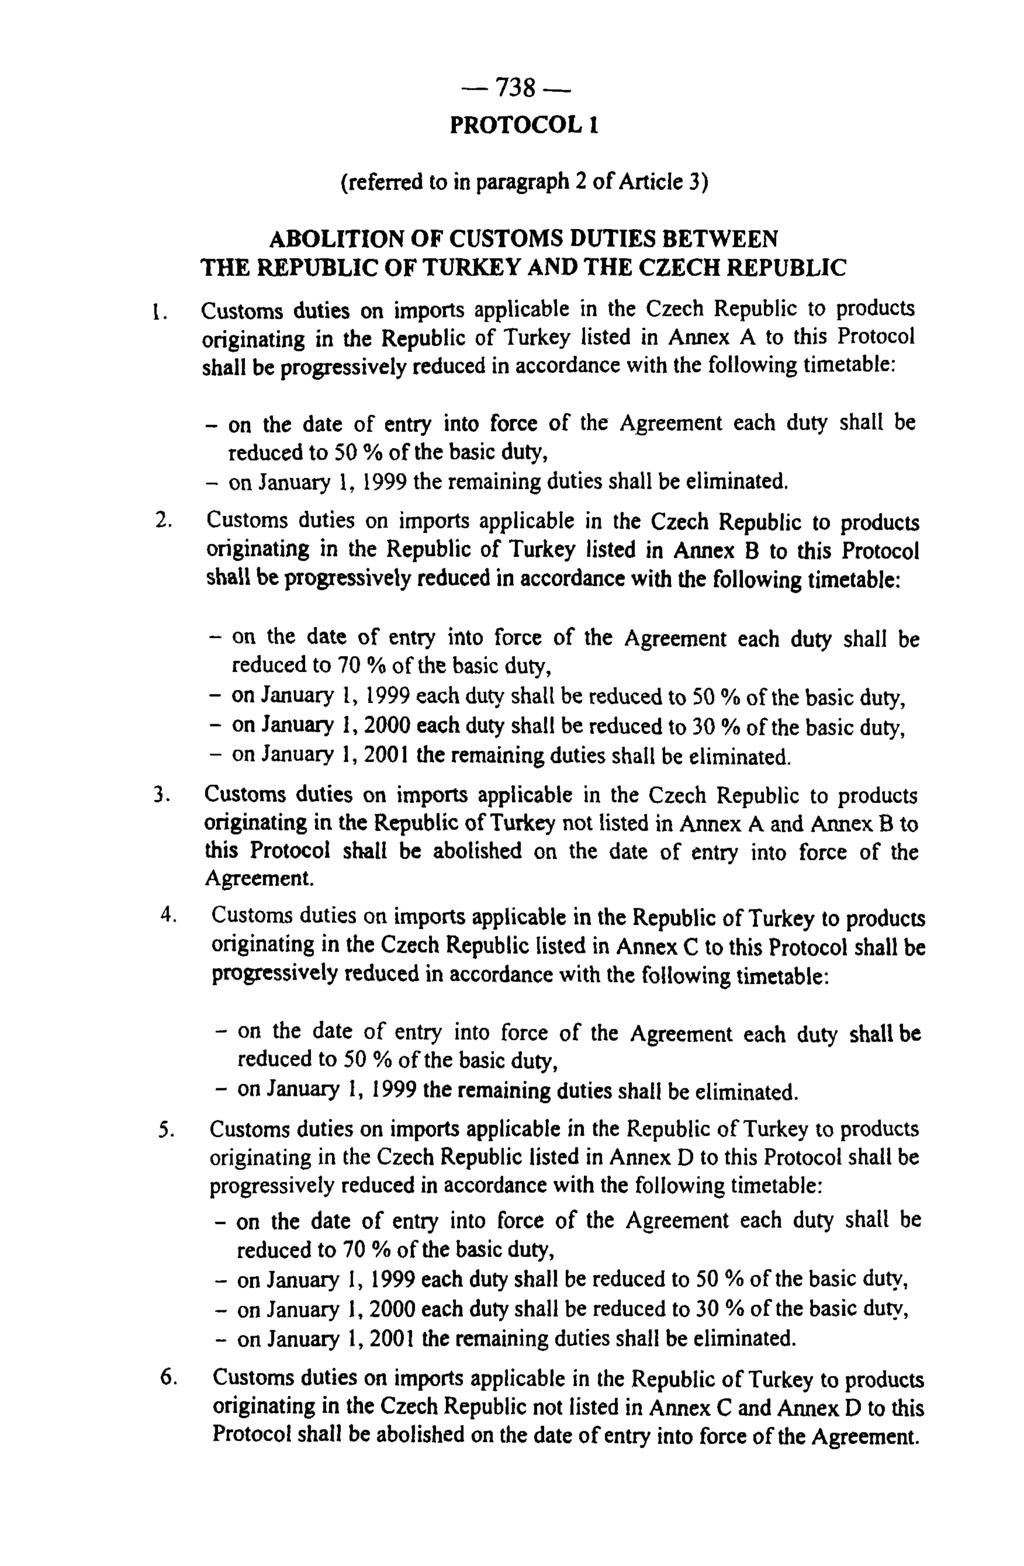 PROTOCOL I (referred to in paragraph 2 of Article 3) ABOLITION OF CUSTOMS DUTIES BETWEEN THE REPUBLIC OF TURKEY AND THE CZECH REPUBLIC Customs duties on imports applicable in the Czech Republic to s